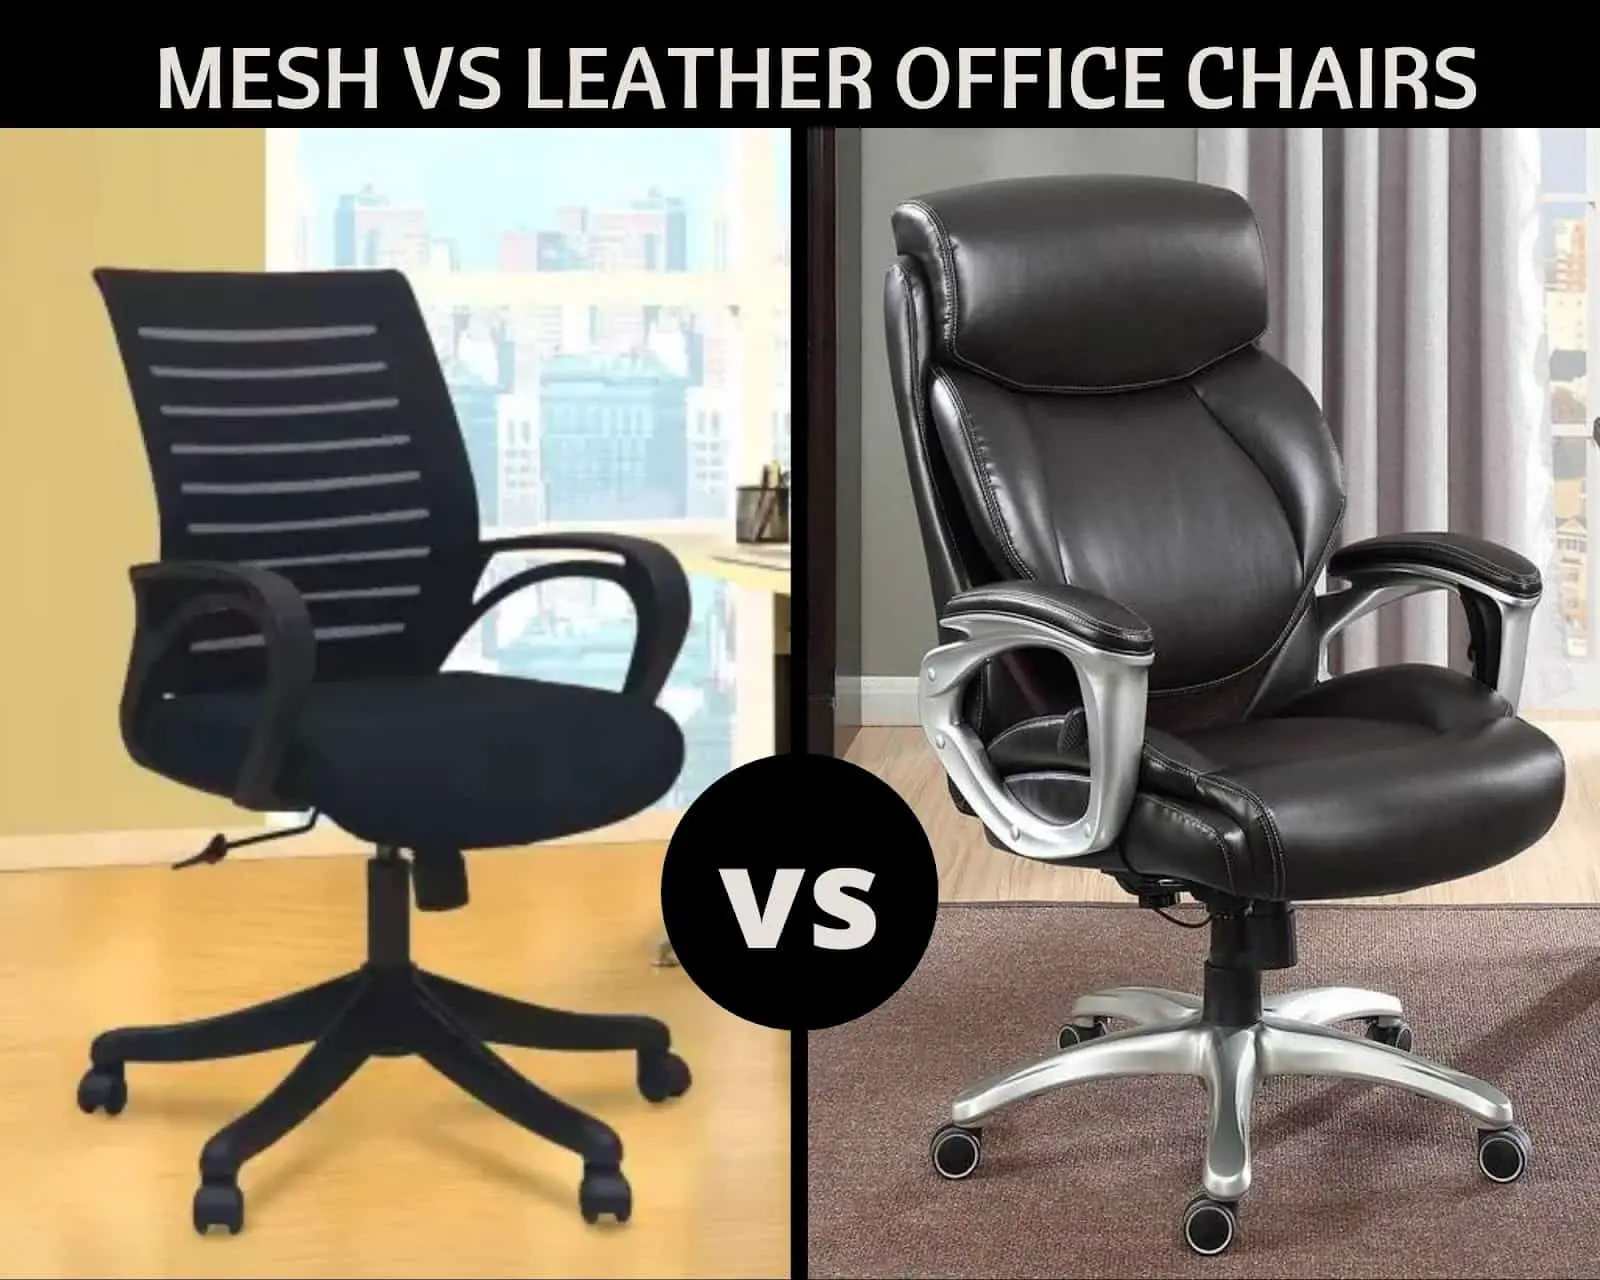 What's the difference between mesh and leather